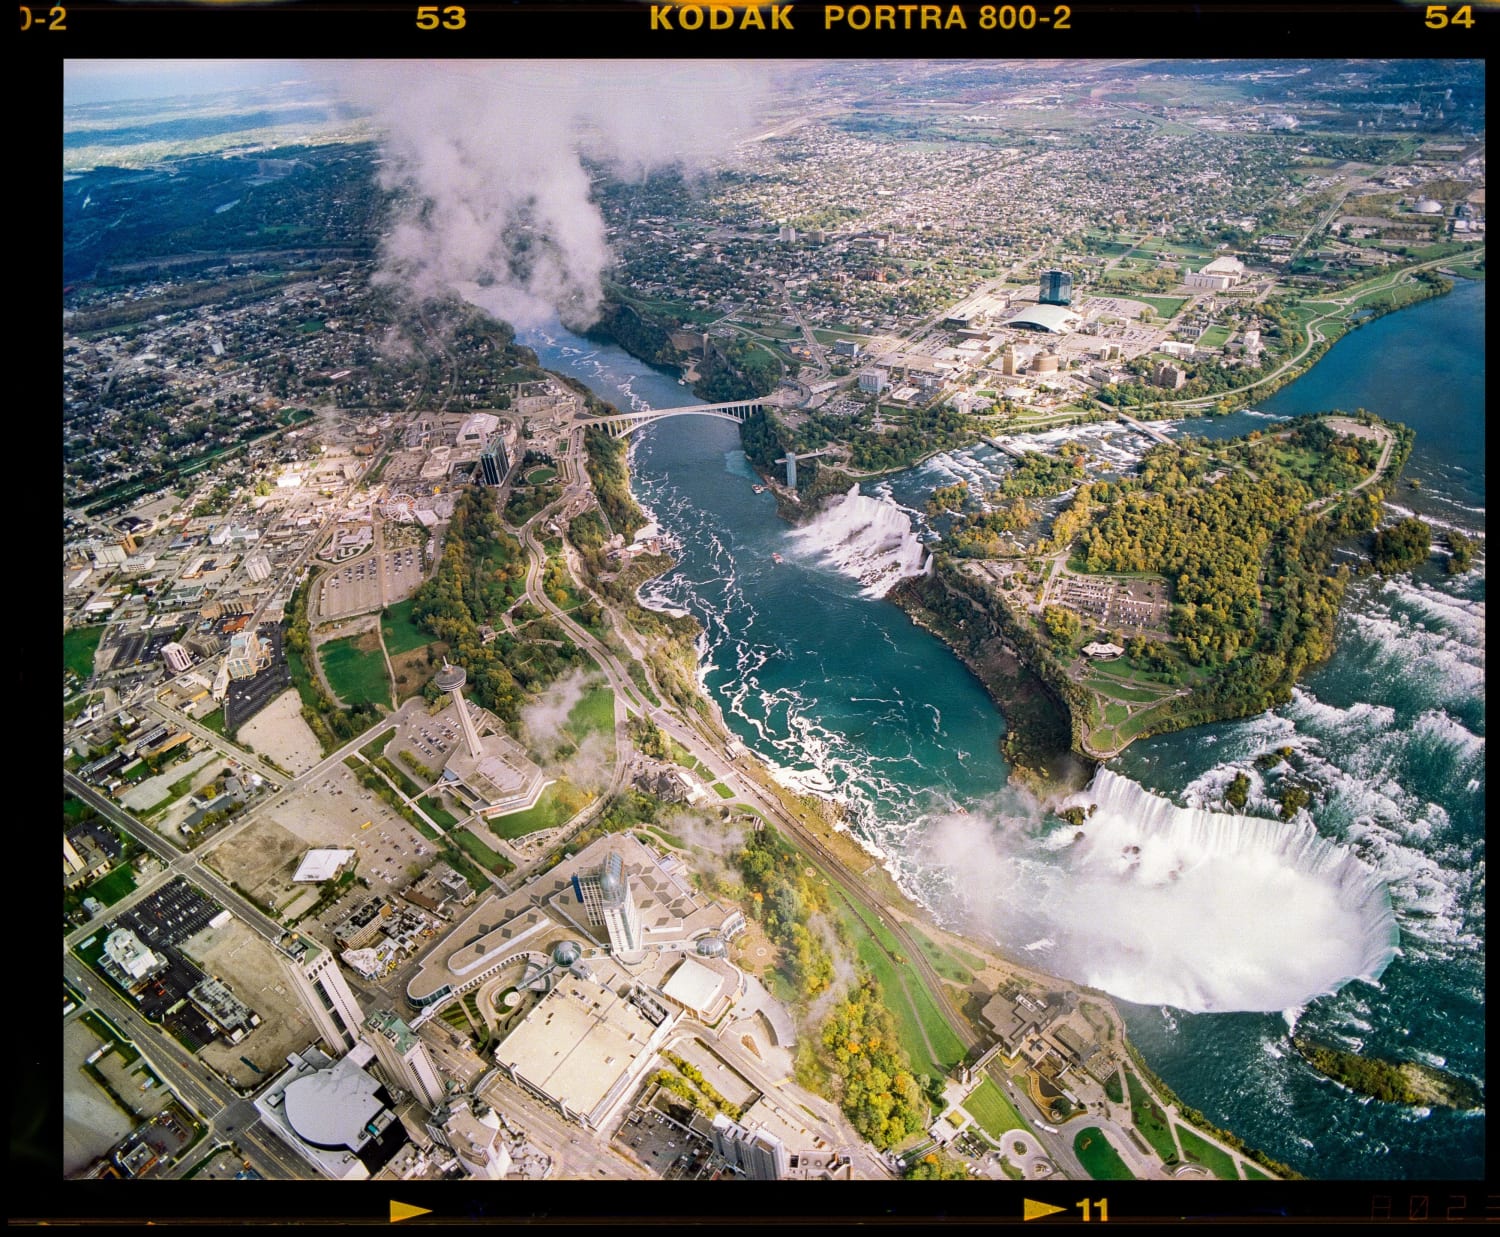 Niagara Falls aerial view from a helicopter. Portra 800, pentax 67+45mm F4. Unicolor c41 and Epson v600.